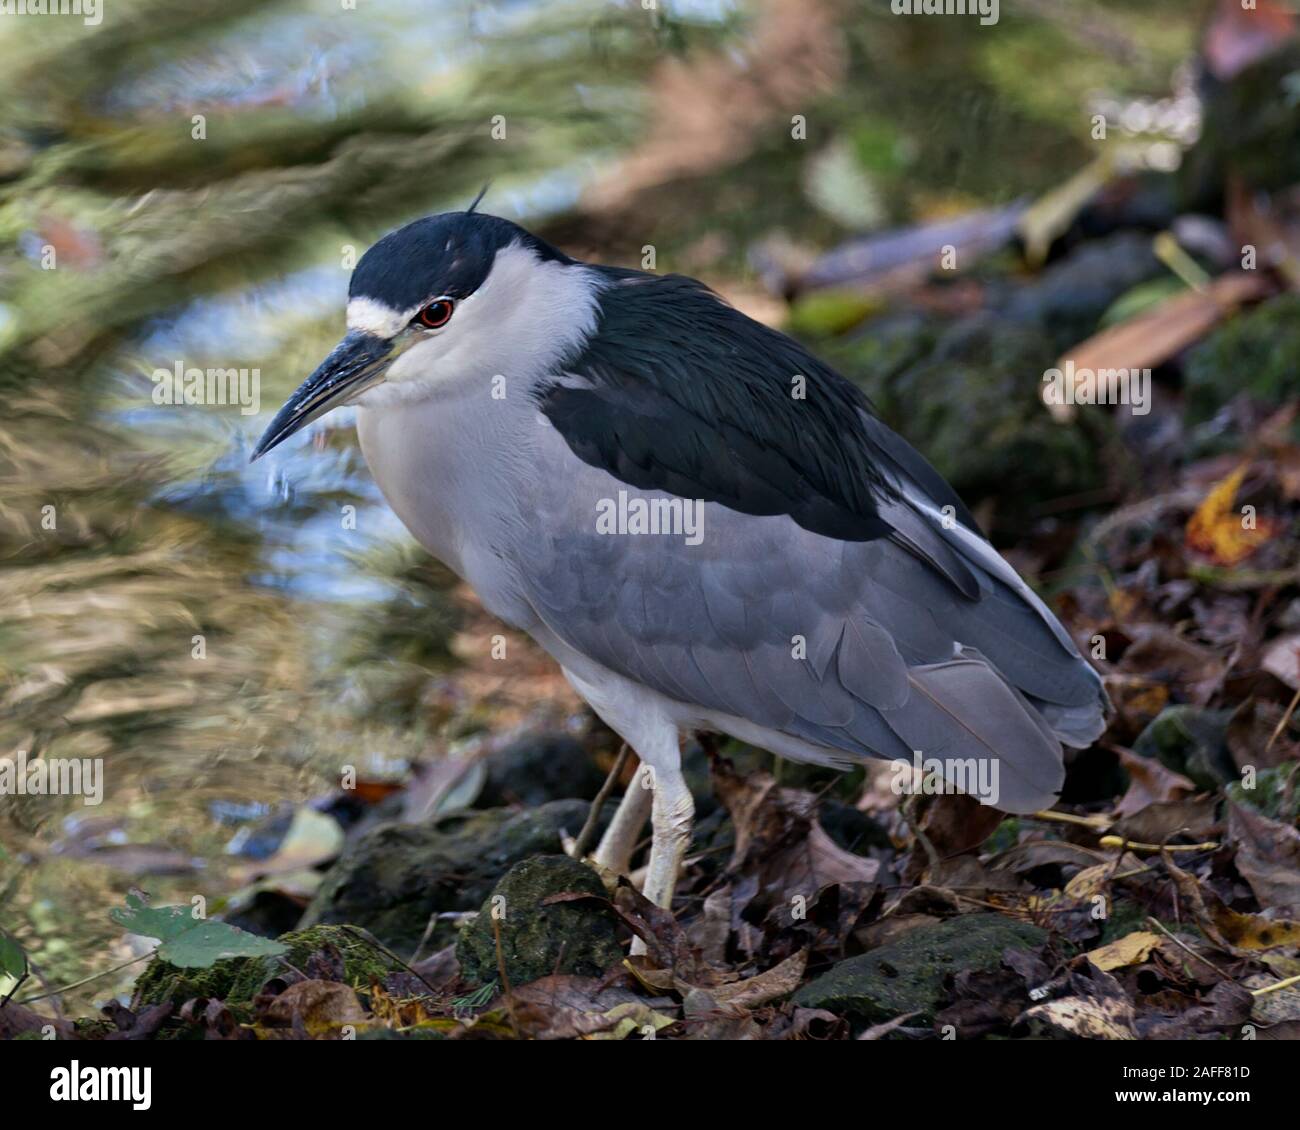 Black crowned Night-heron adult bird closeup profile view perched on a rock by the water displaying plumage, head, beak, eye, in its surrounding and e Stock Photo